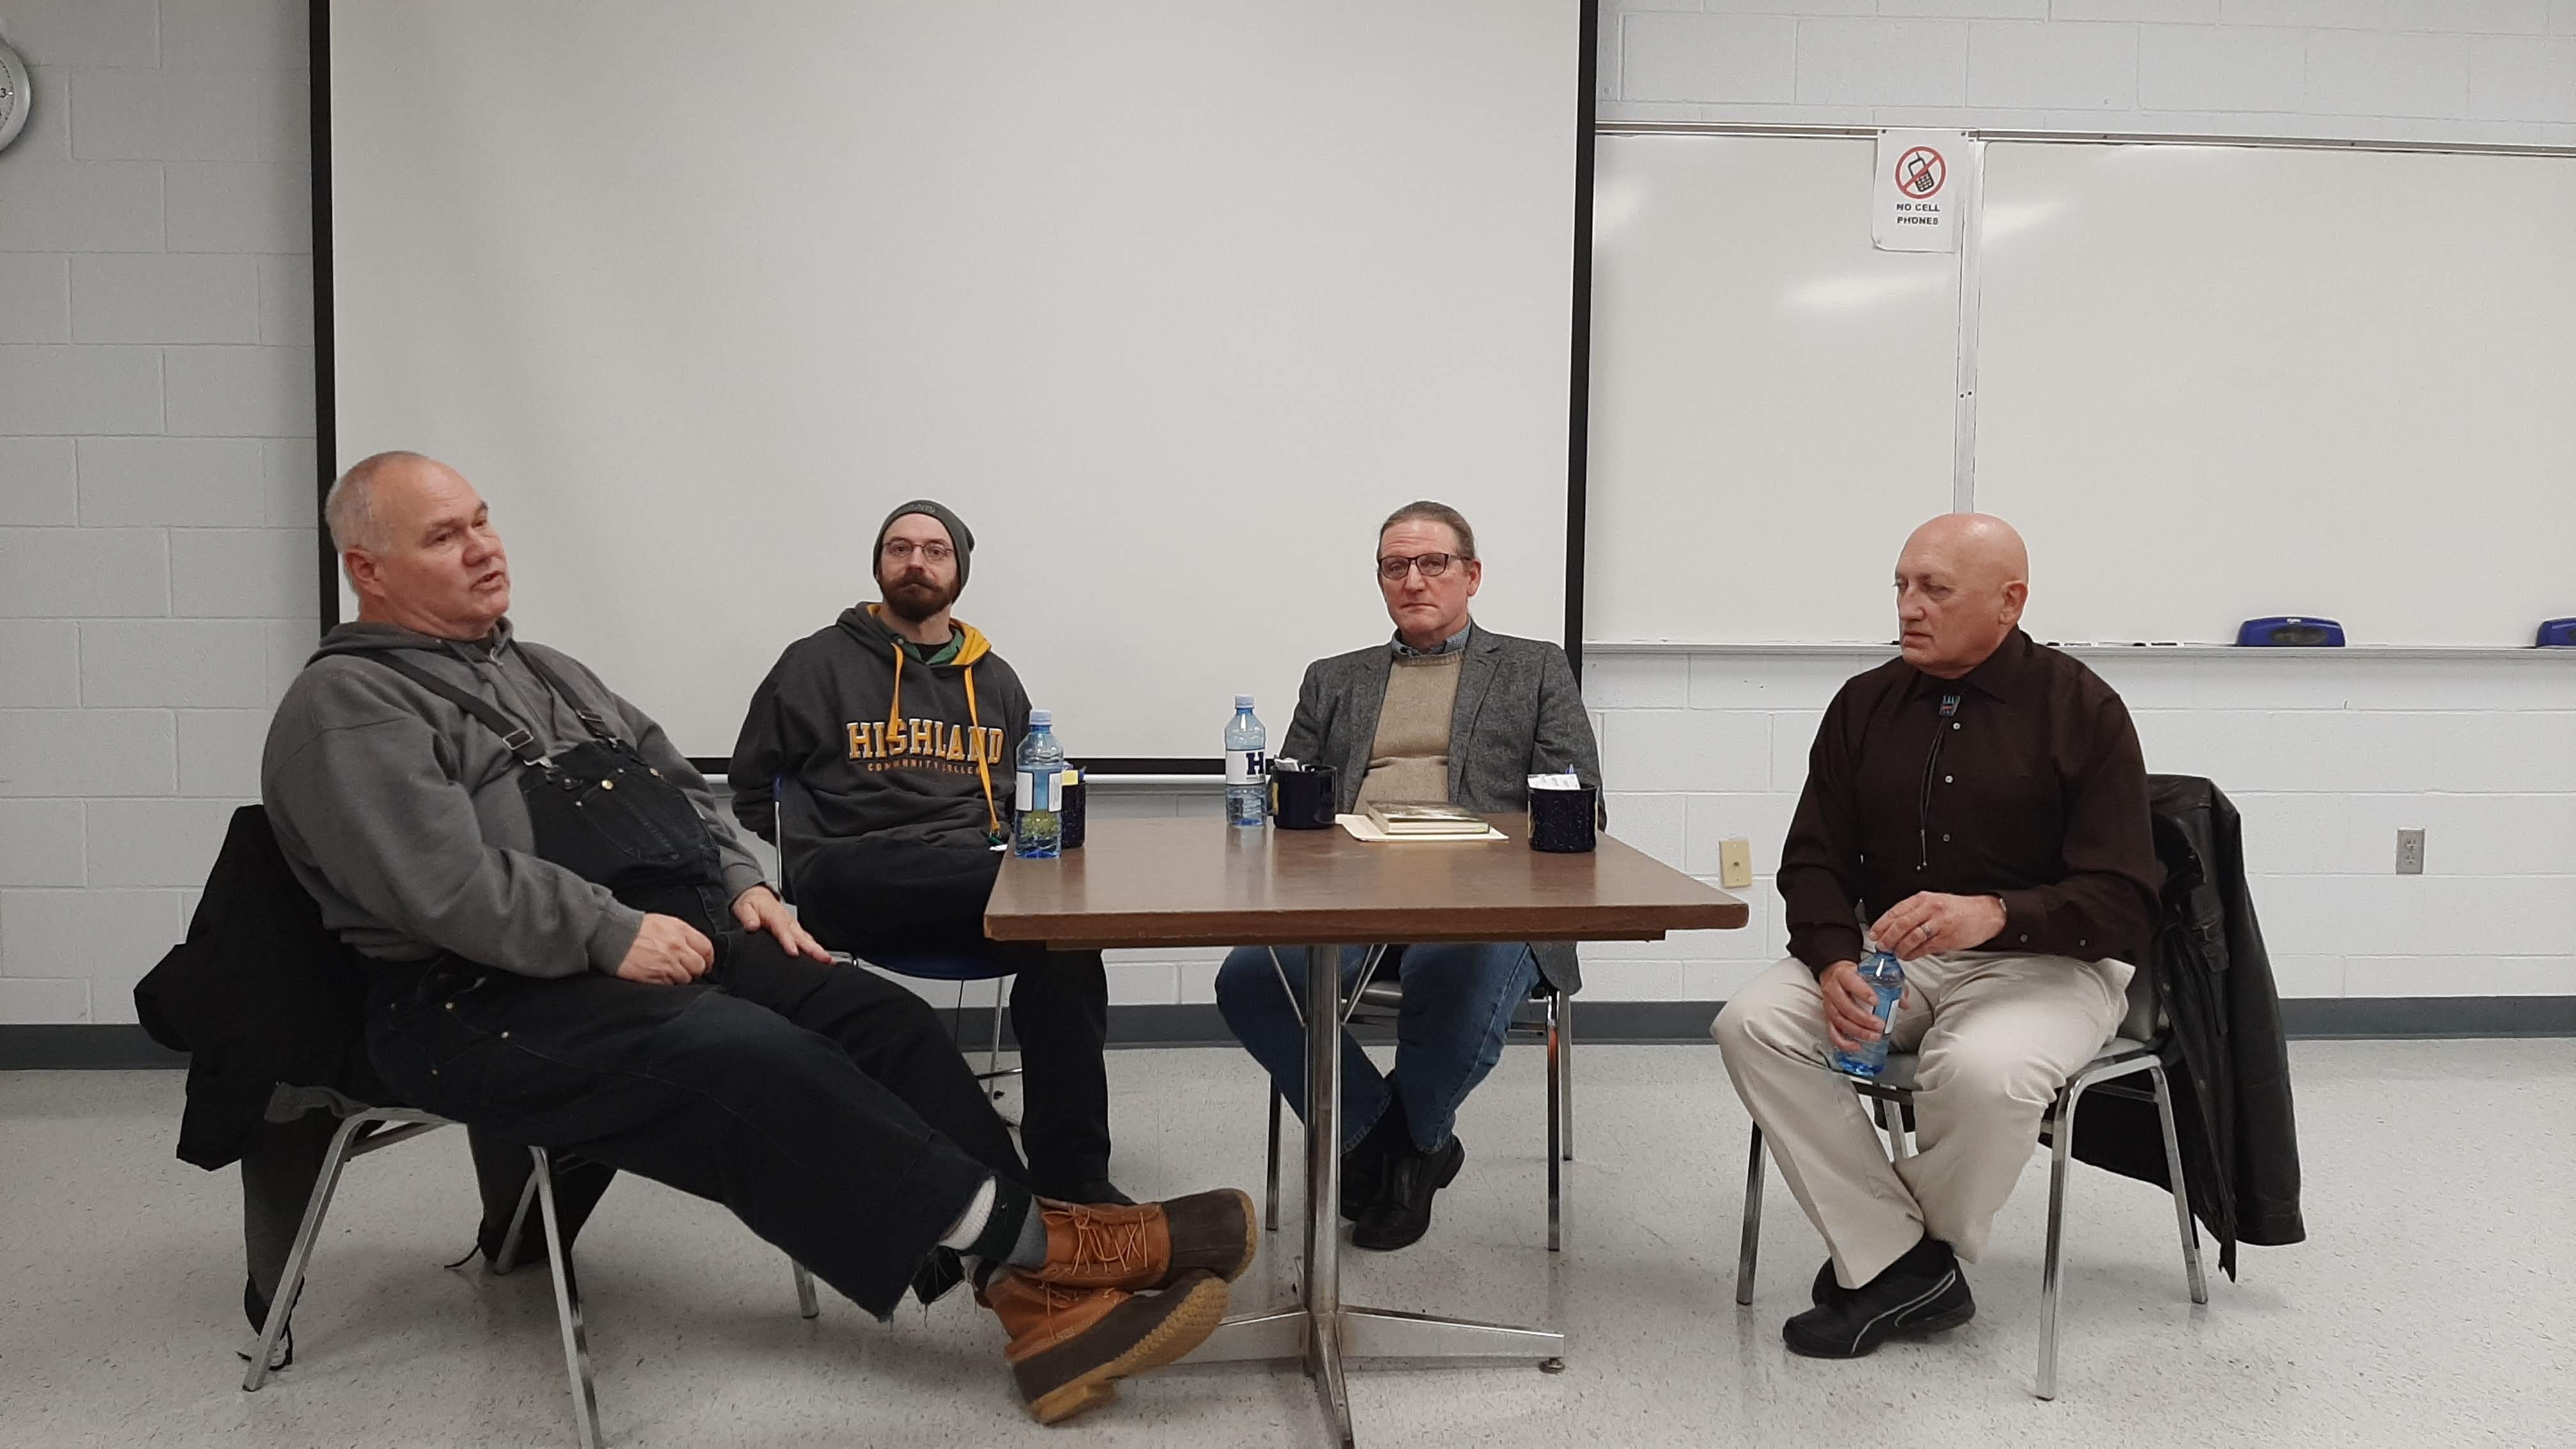 Highland Hosts Panel Discussion, “Interpretation of the Past, by Those Living in the Present, Influences the Future”